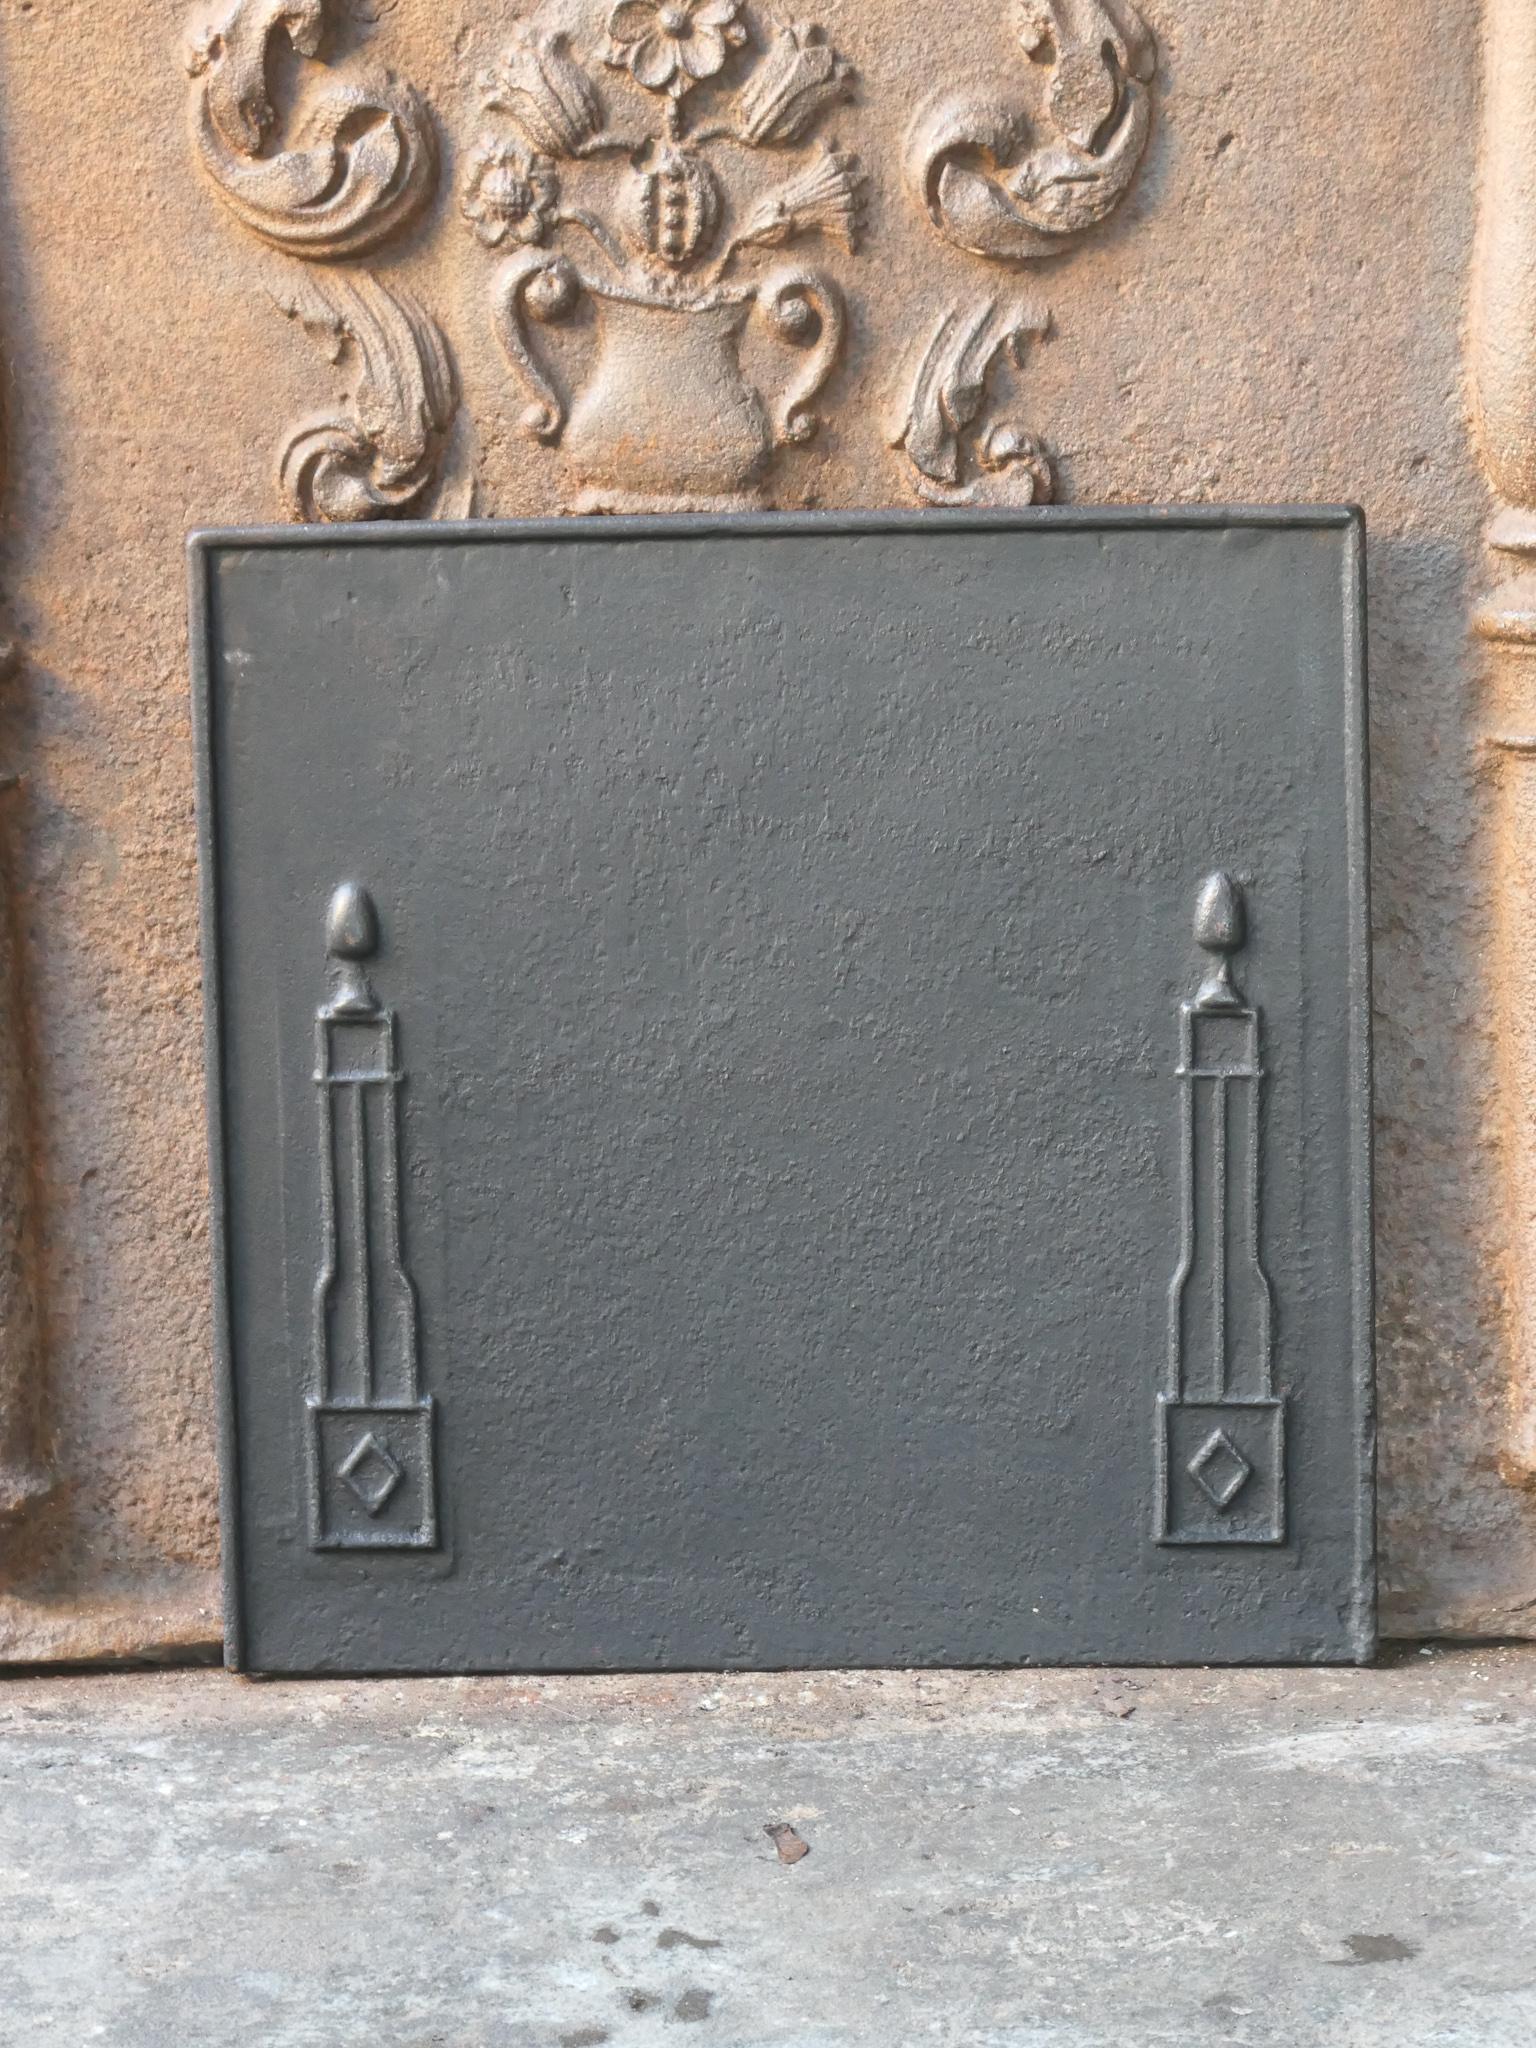 18th - 19th Century French neoclassical fireback with two pillars of freedom. The pillars symbolize the value liberty, one of the three values of the French revolution. 

The fireback is made of cast iron and has a black / pewter patina. It is in